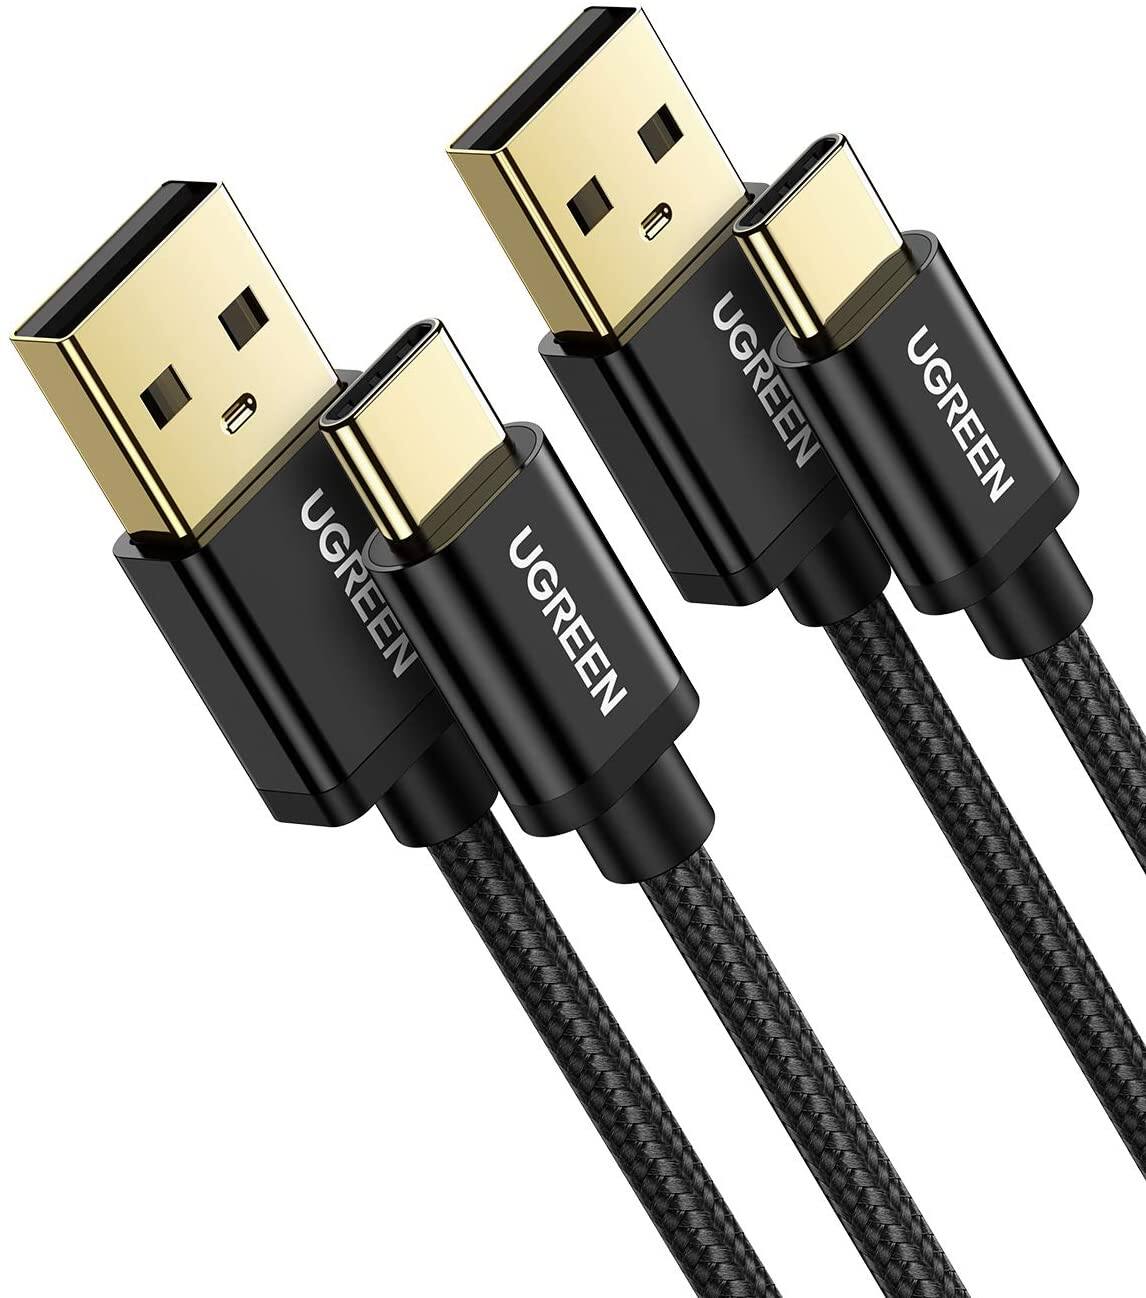 UGREEN USB C Cable 2 Pack $6.29 + Free Shipping w/ Amazon Prime or Orders $25+